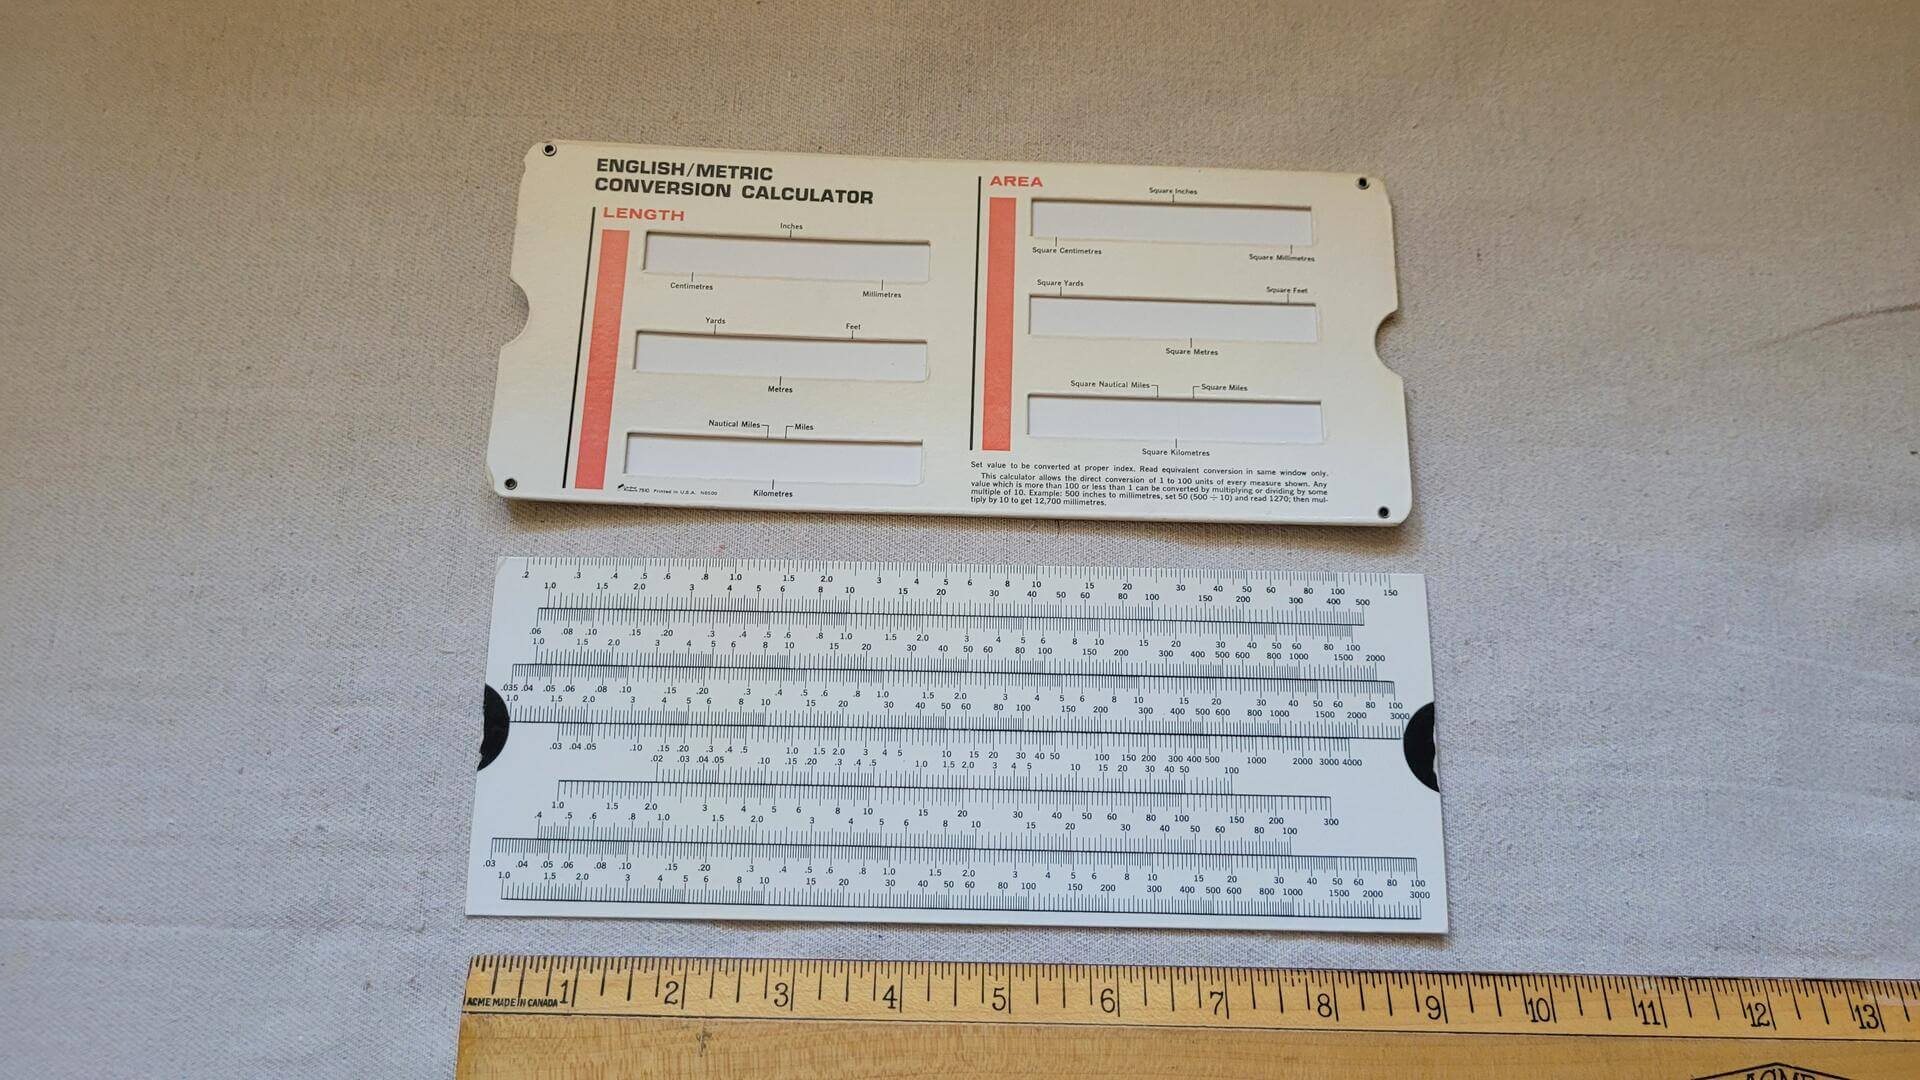 Vintage cardboard sliding English/Metric Conversion Calculator used for conversion of inches to cm, ounces to gallons, Liquid, Volume, Length, Area Equivalency Chart Case. 1970s antique made in USA collectible slide rule, retro office and school tools and supplies.